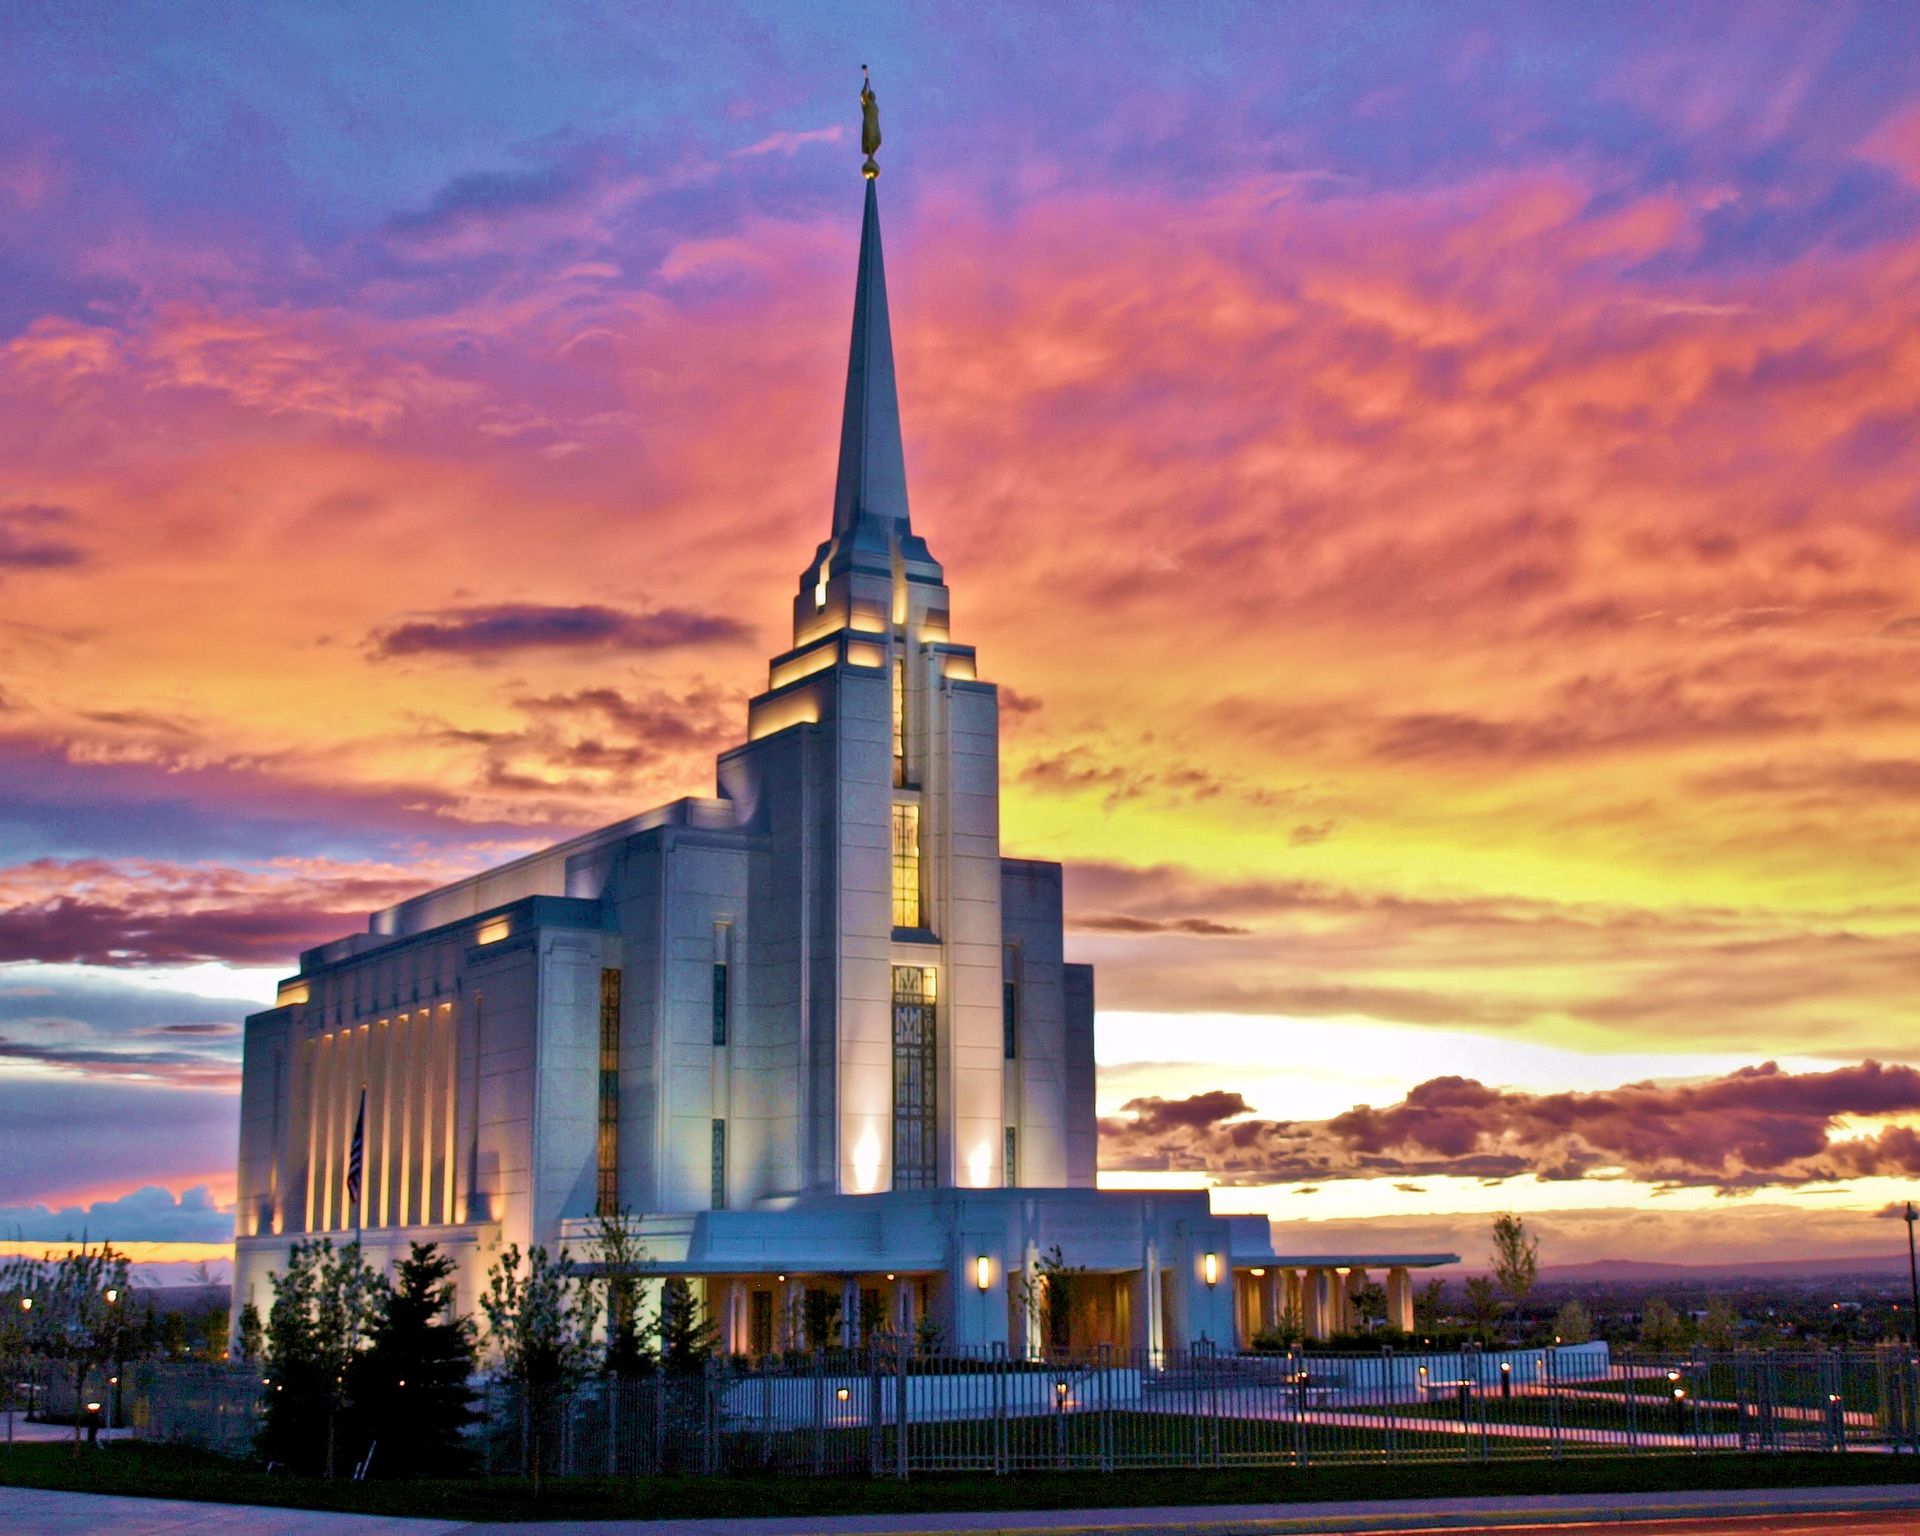 The Rexburg Idaho Temple at sunset, including the entrance and scenery.